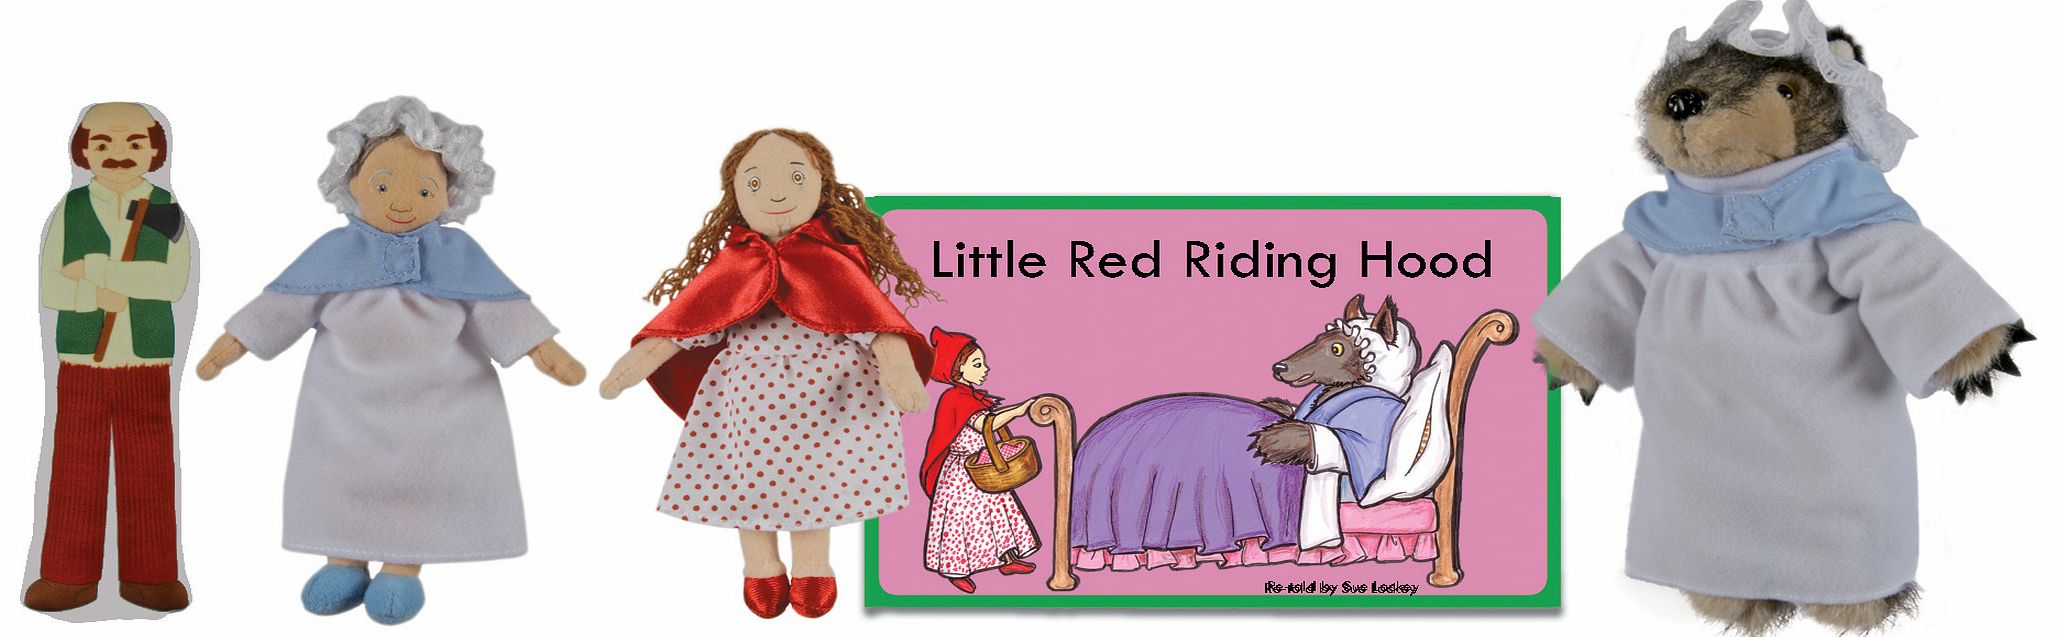 The Puppet Company Traditional Story Set - Little Red Riding